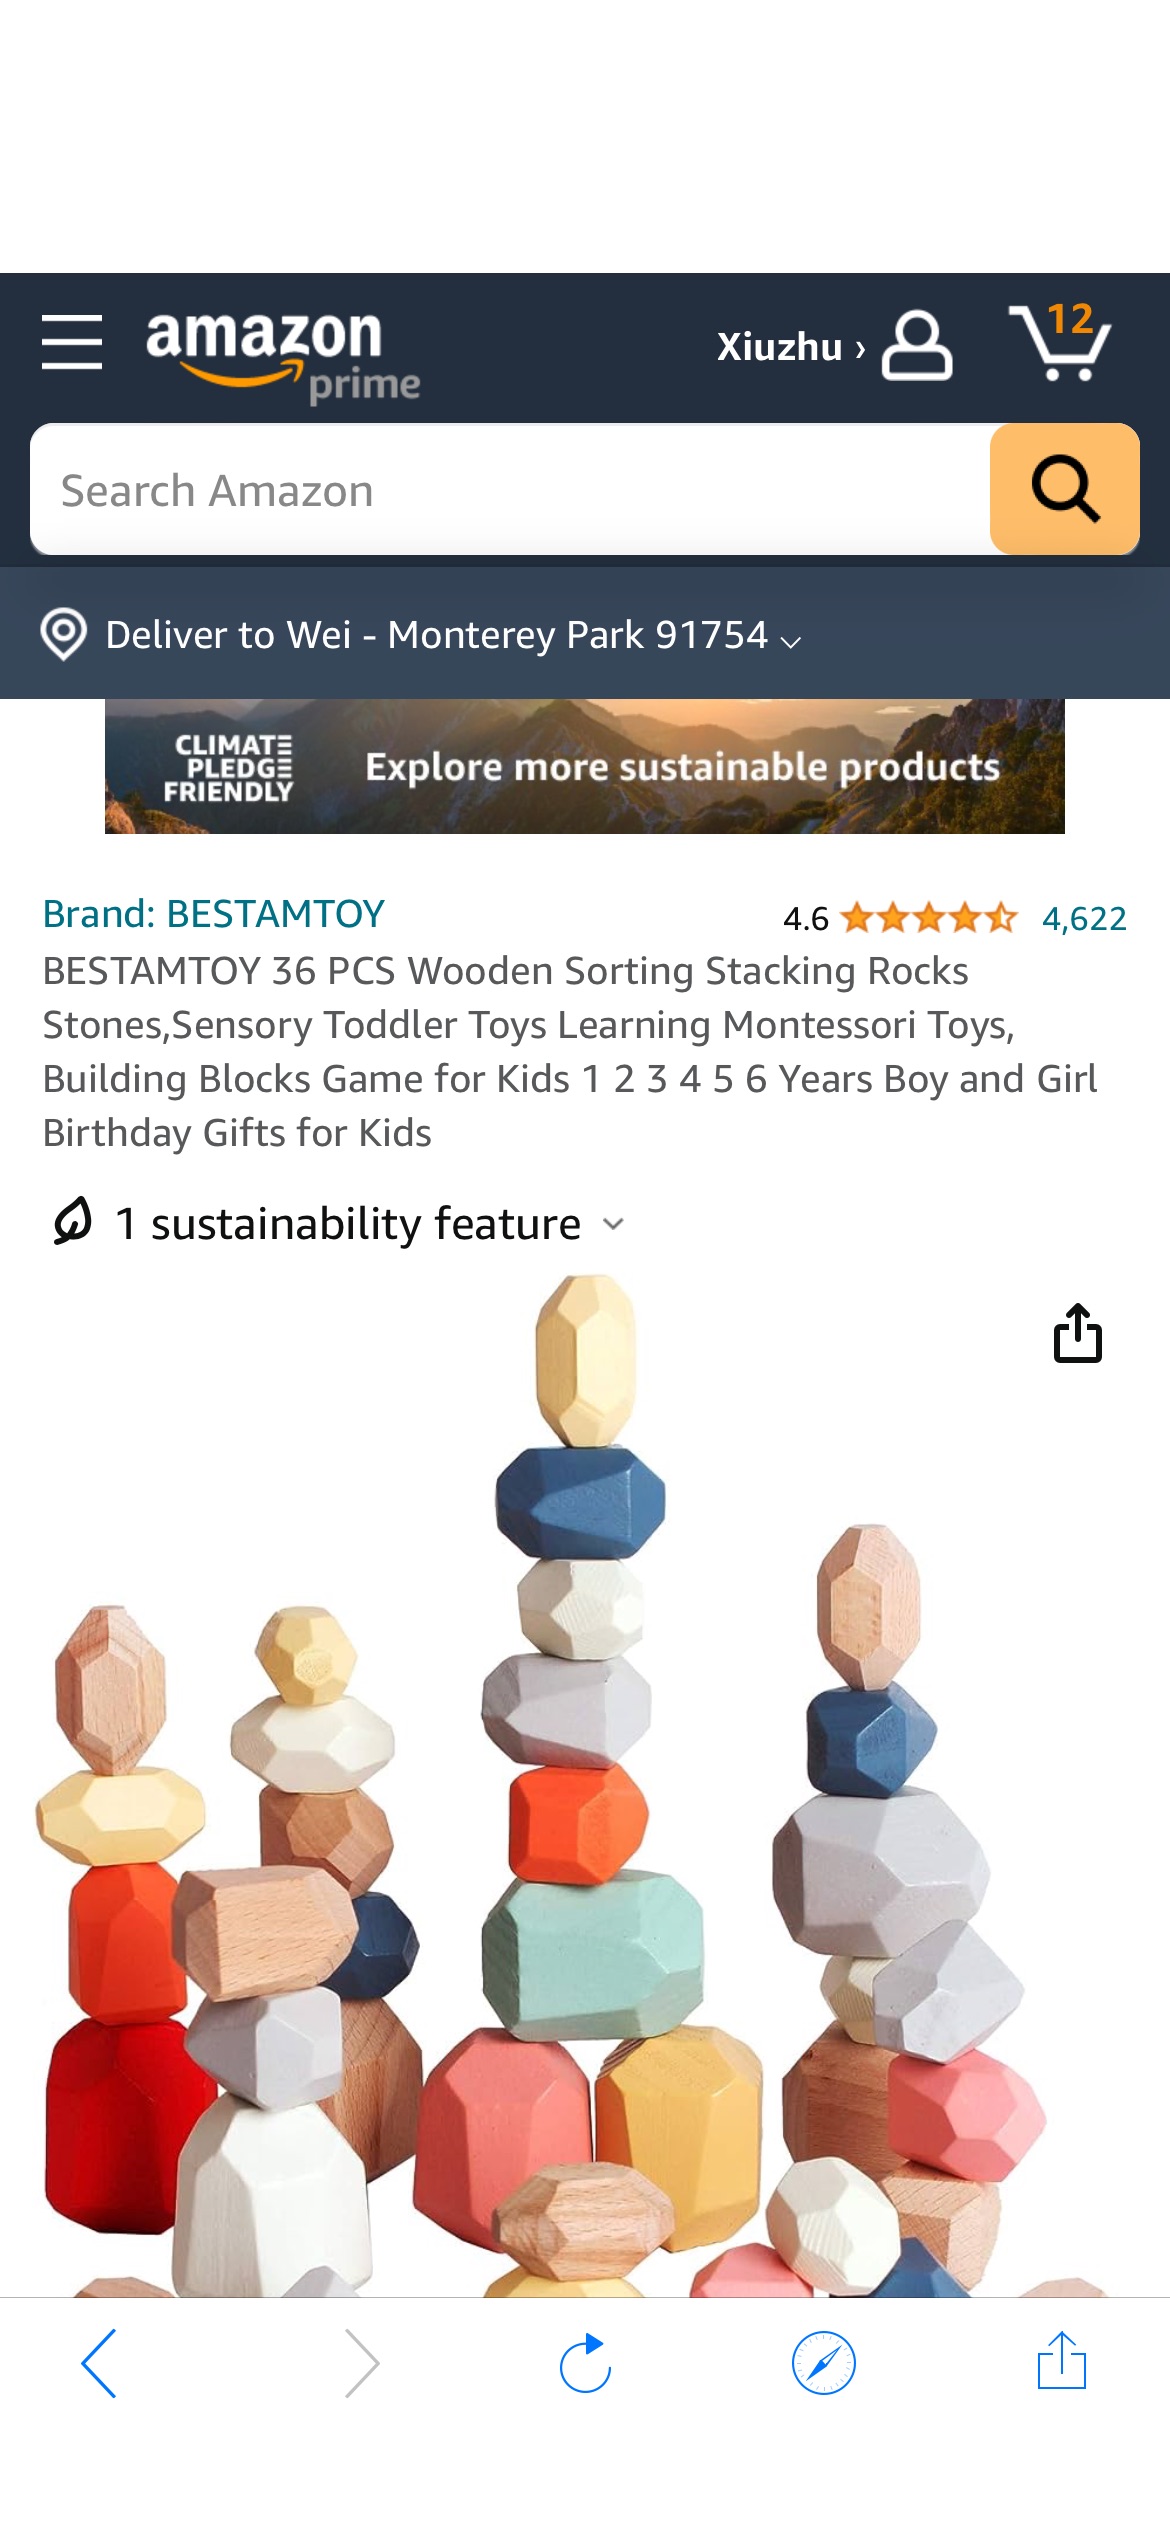 Amazon.com: BESTAMTOY 36 PCS Wooden Sorting Stacking Rocks Stones,Sensory Toddler Toys Learning Montessori Toys, Building Blocks Game for Kids 1 2 3 4 5 6 Years Boy and Girl Birthday Gifts for Kids : 